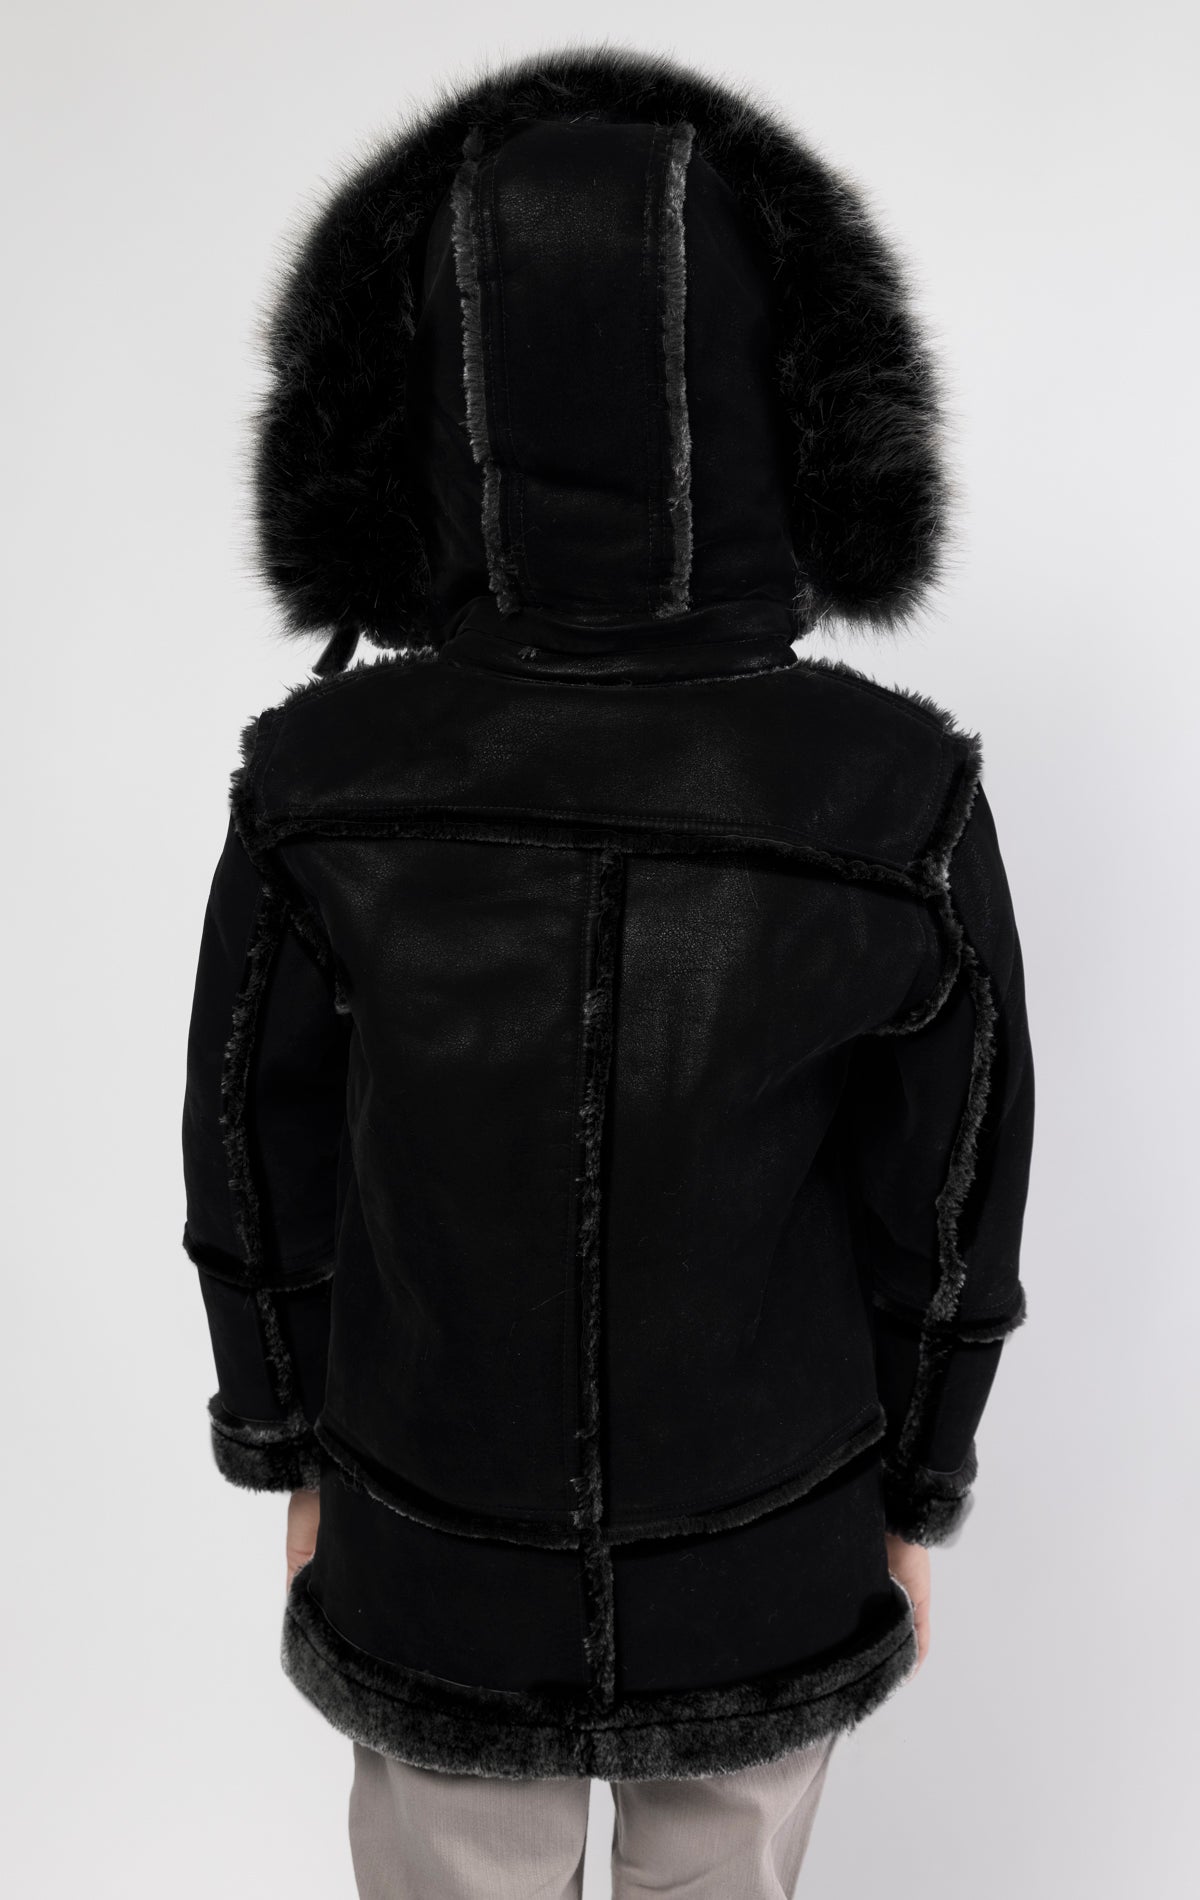 Black jacket lined with plush faux shearling throughout the body and sleeves. It also features shearling-accented pockets, a horn toggle front closure, and vegan suede straps with a buckle at the neck. For added convenience, a detachable faux fox fur hood with a zipper is included. This product is also available for adults.